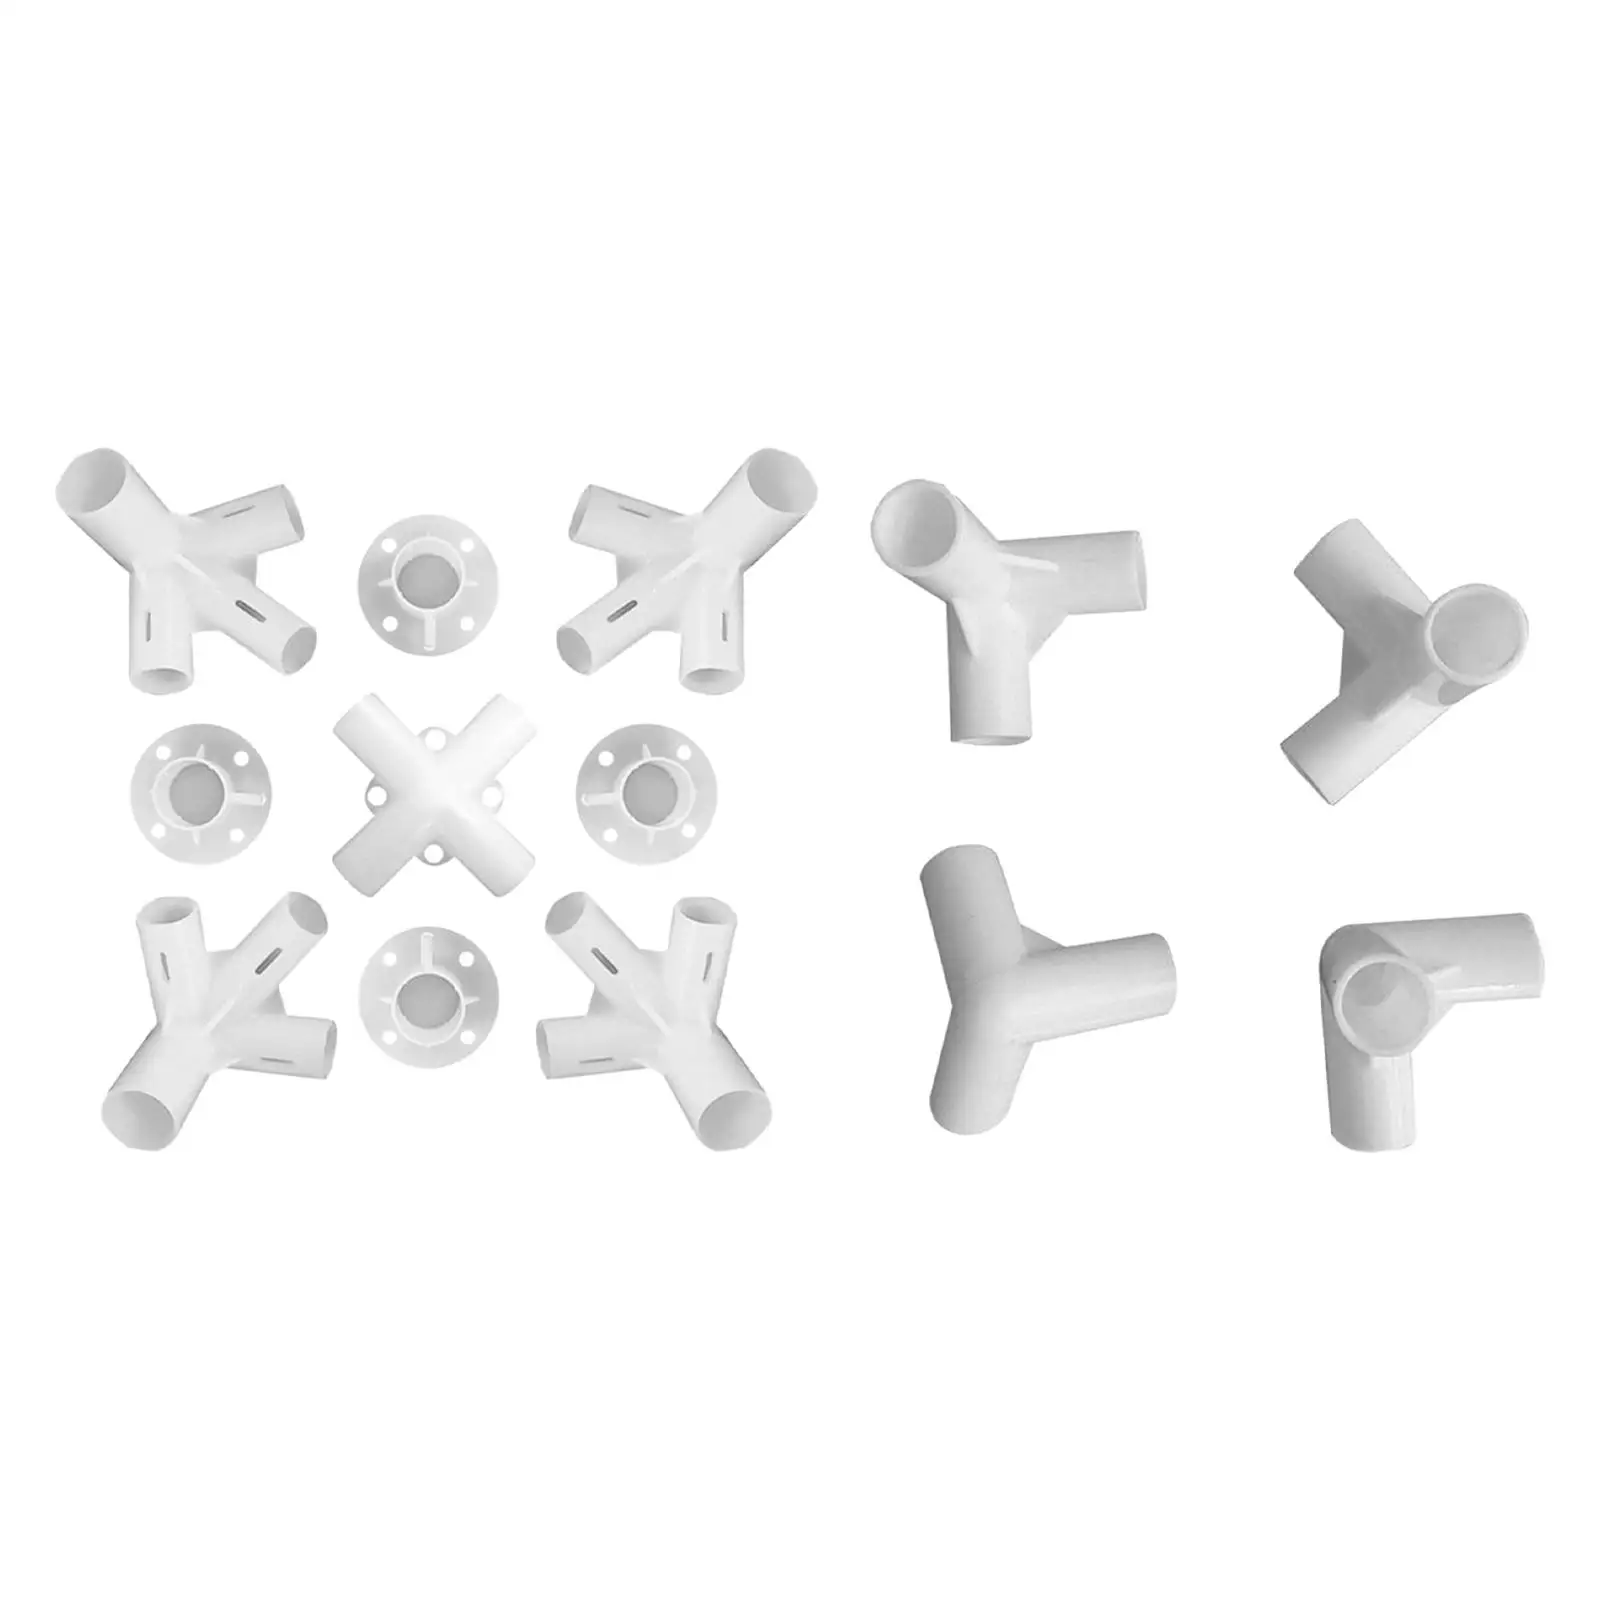 13 Pieces 1 Set Spare Parts Center Connector Corner Mounting 25/19mm Feet Replacement 3 Outdoor Gazebo Camping